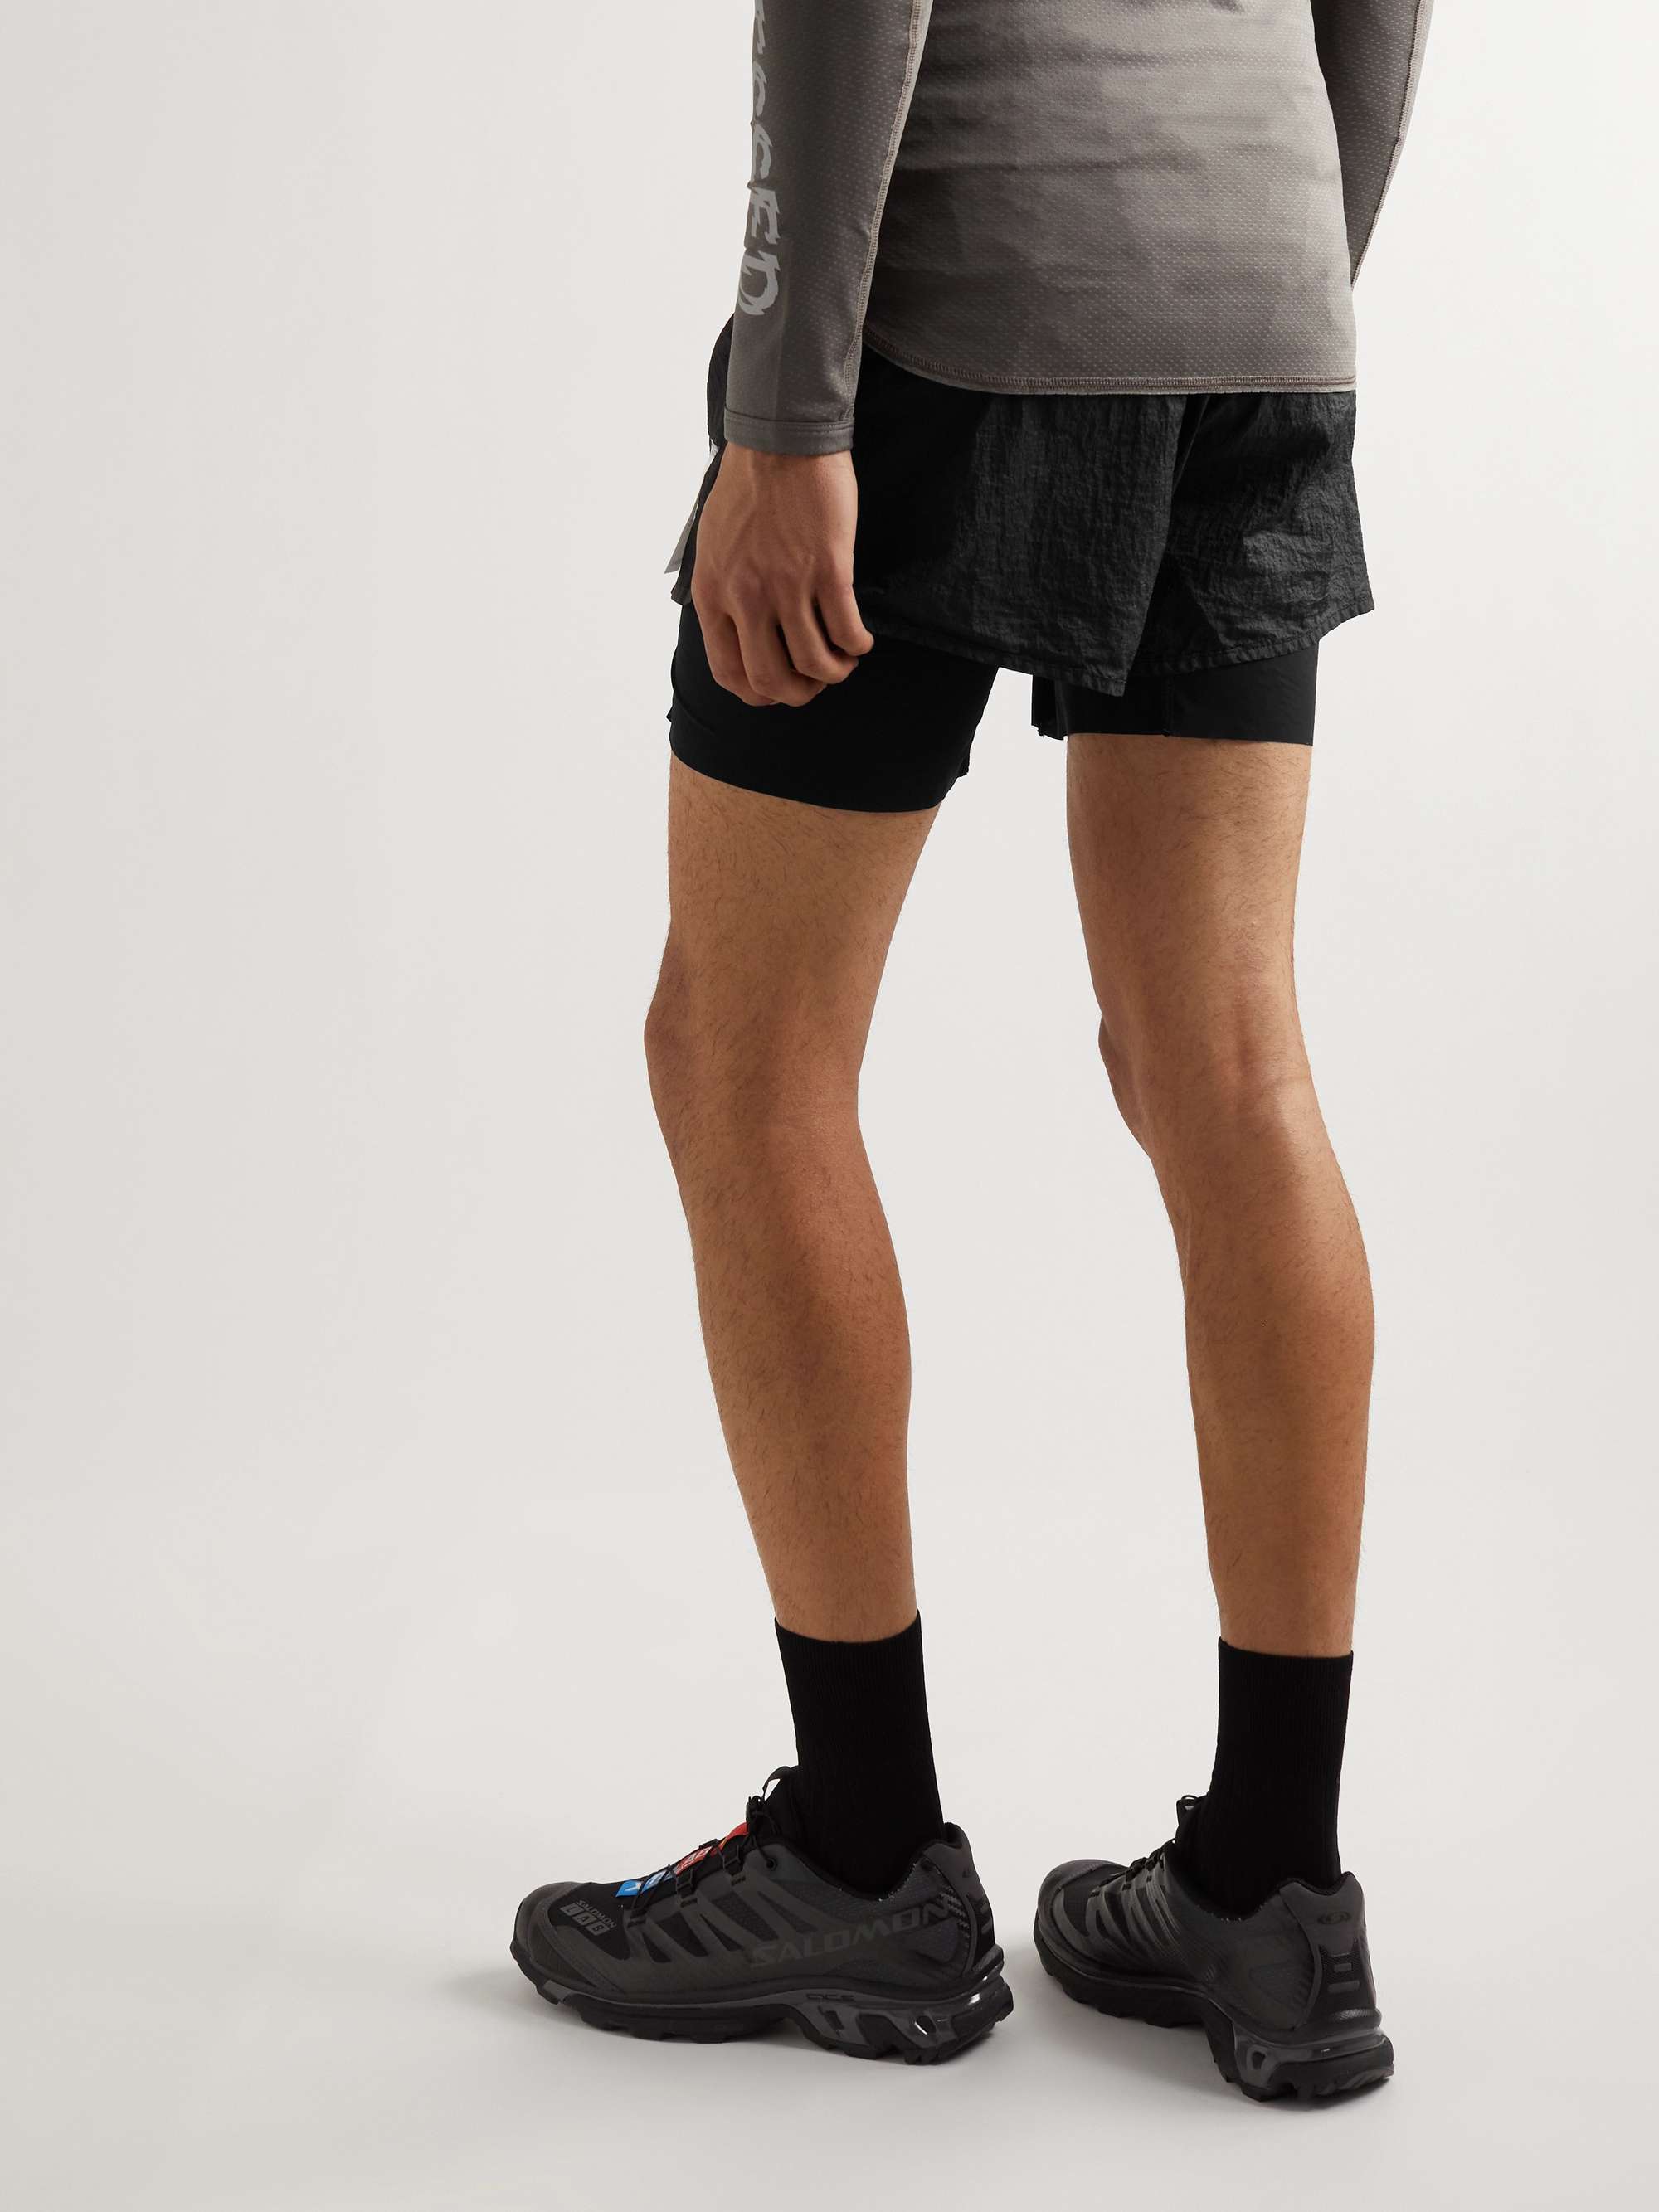 SATISFY Layered Rippy and Justice Shorts